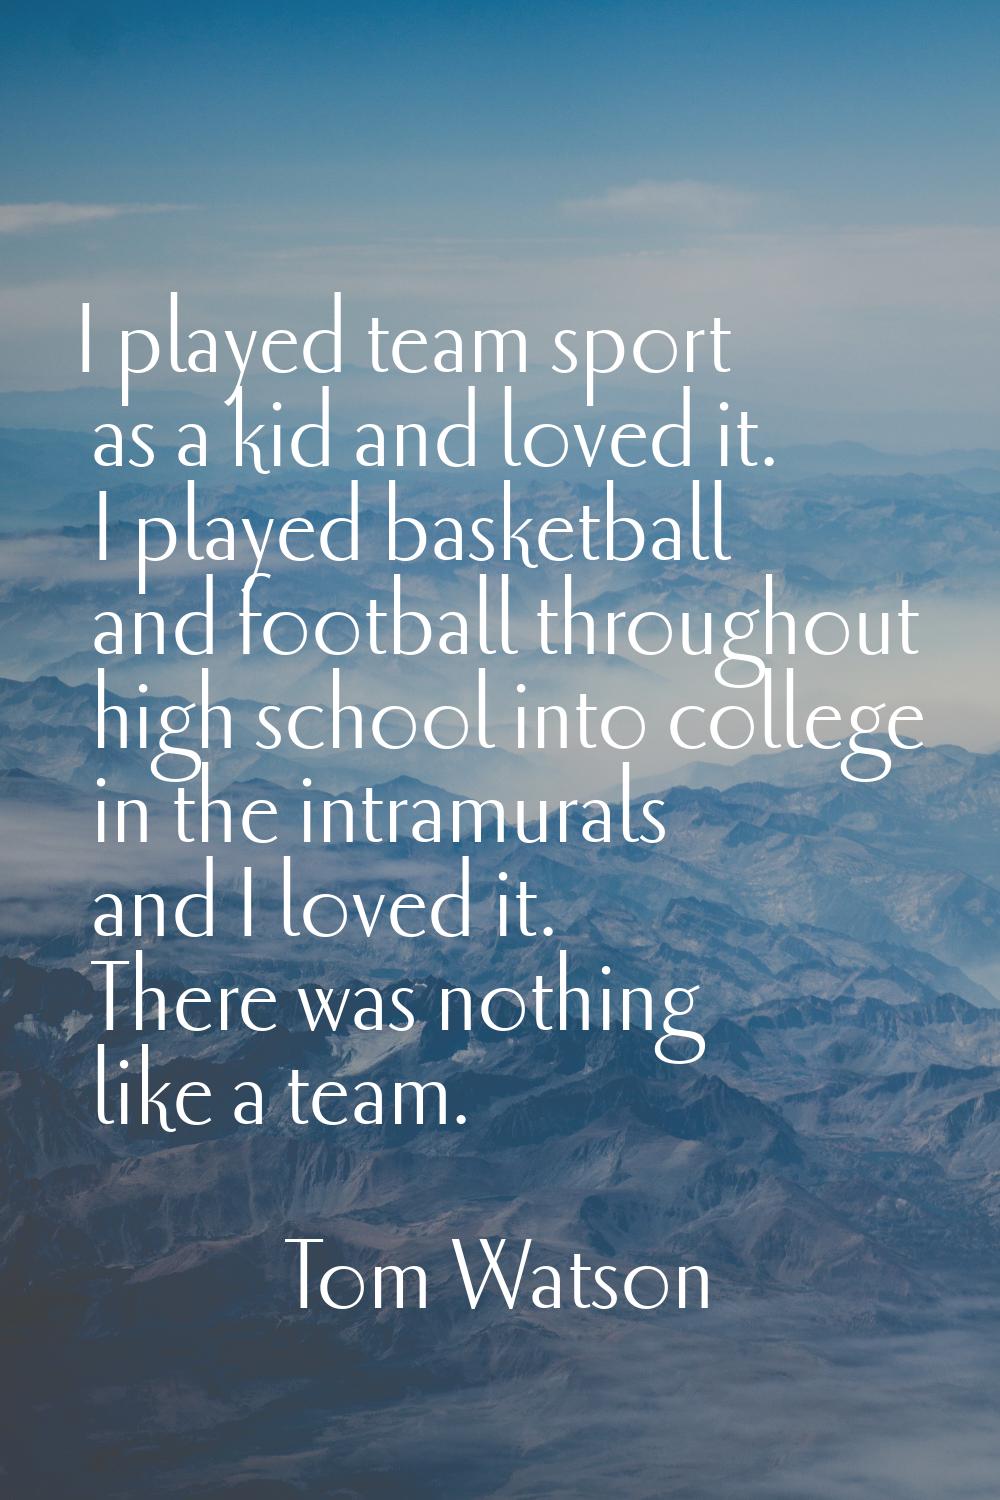 I played team sport as a kid and loved it. I played basketball and football throughout high school 